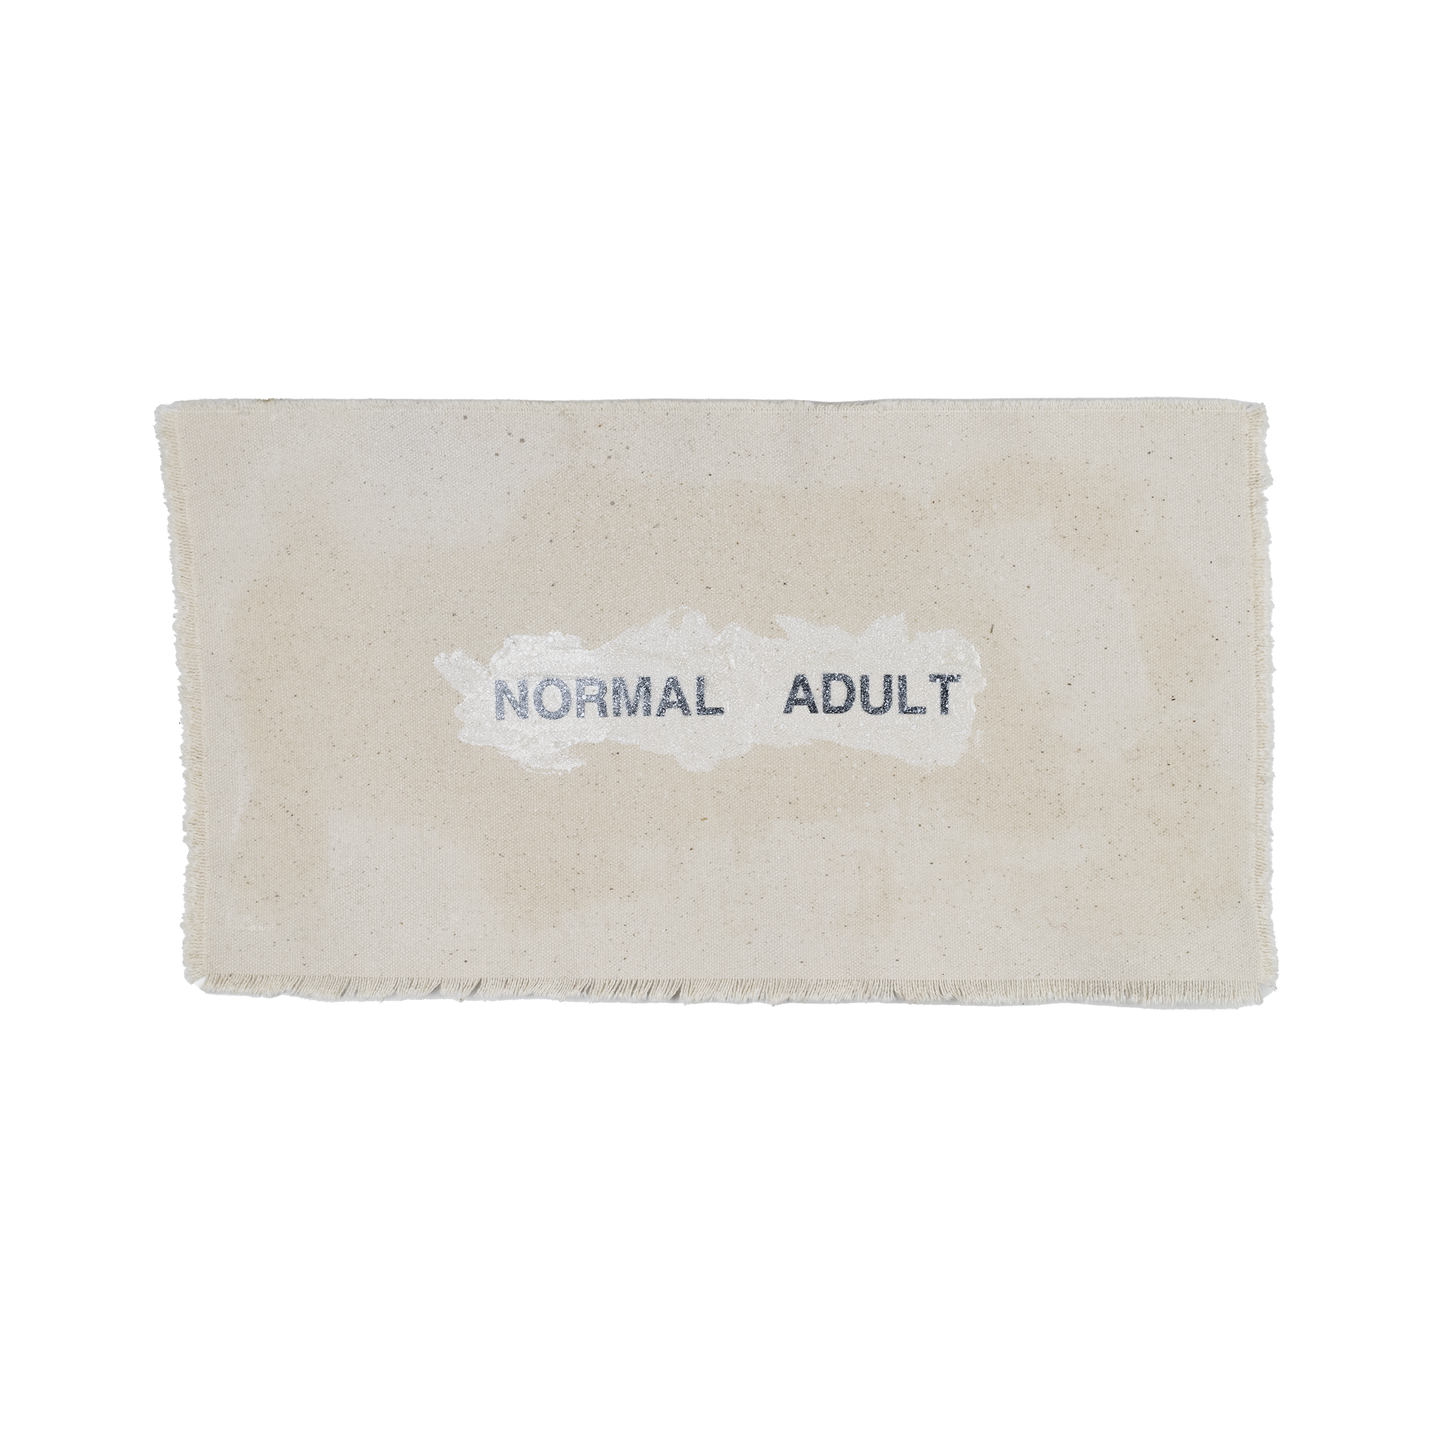 Normal Adult